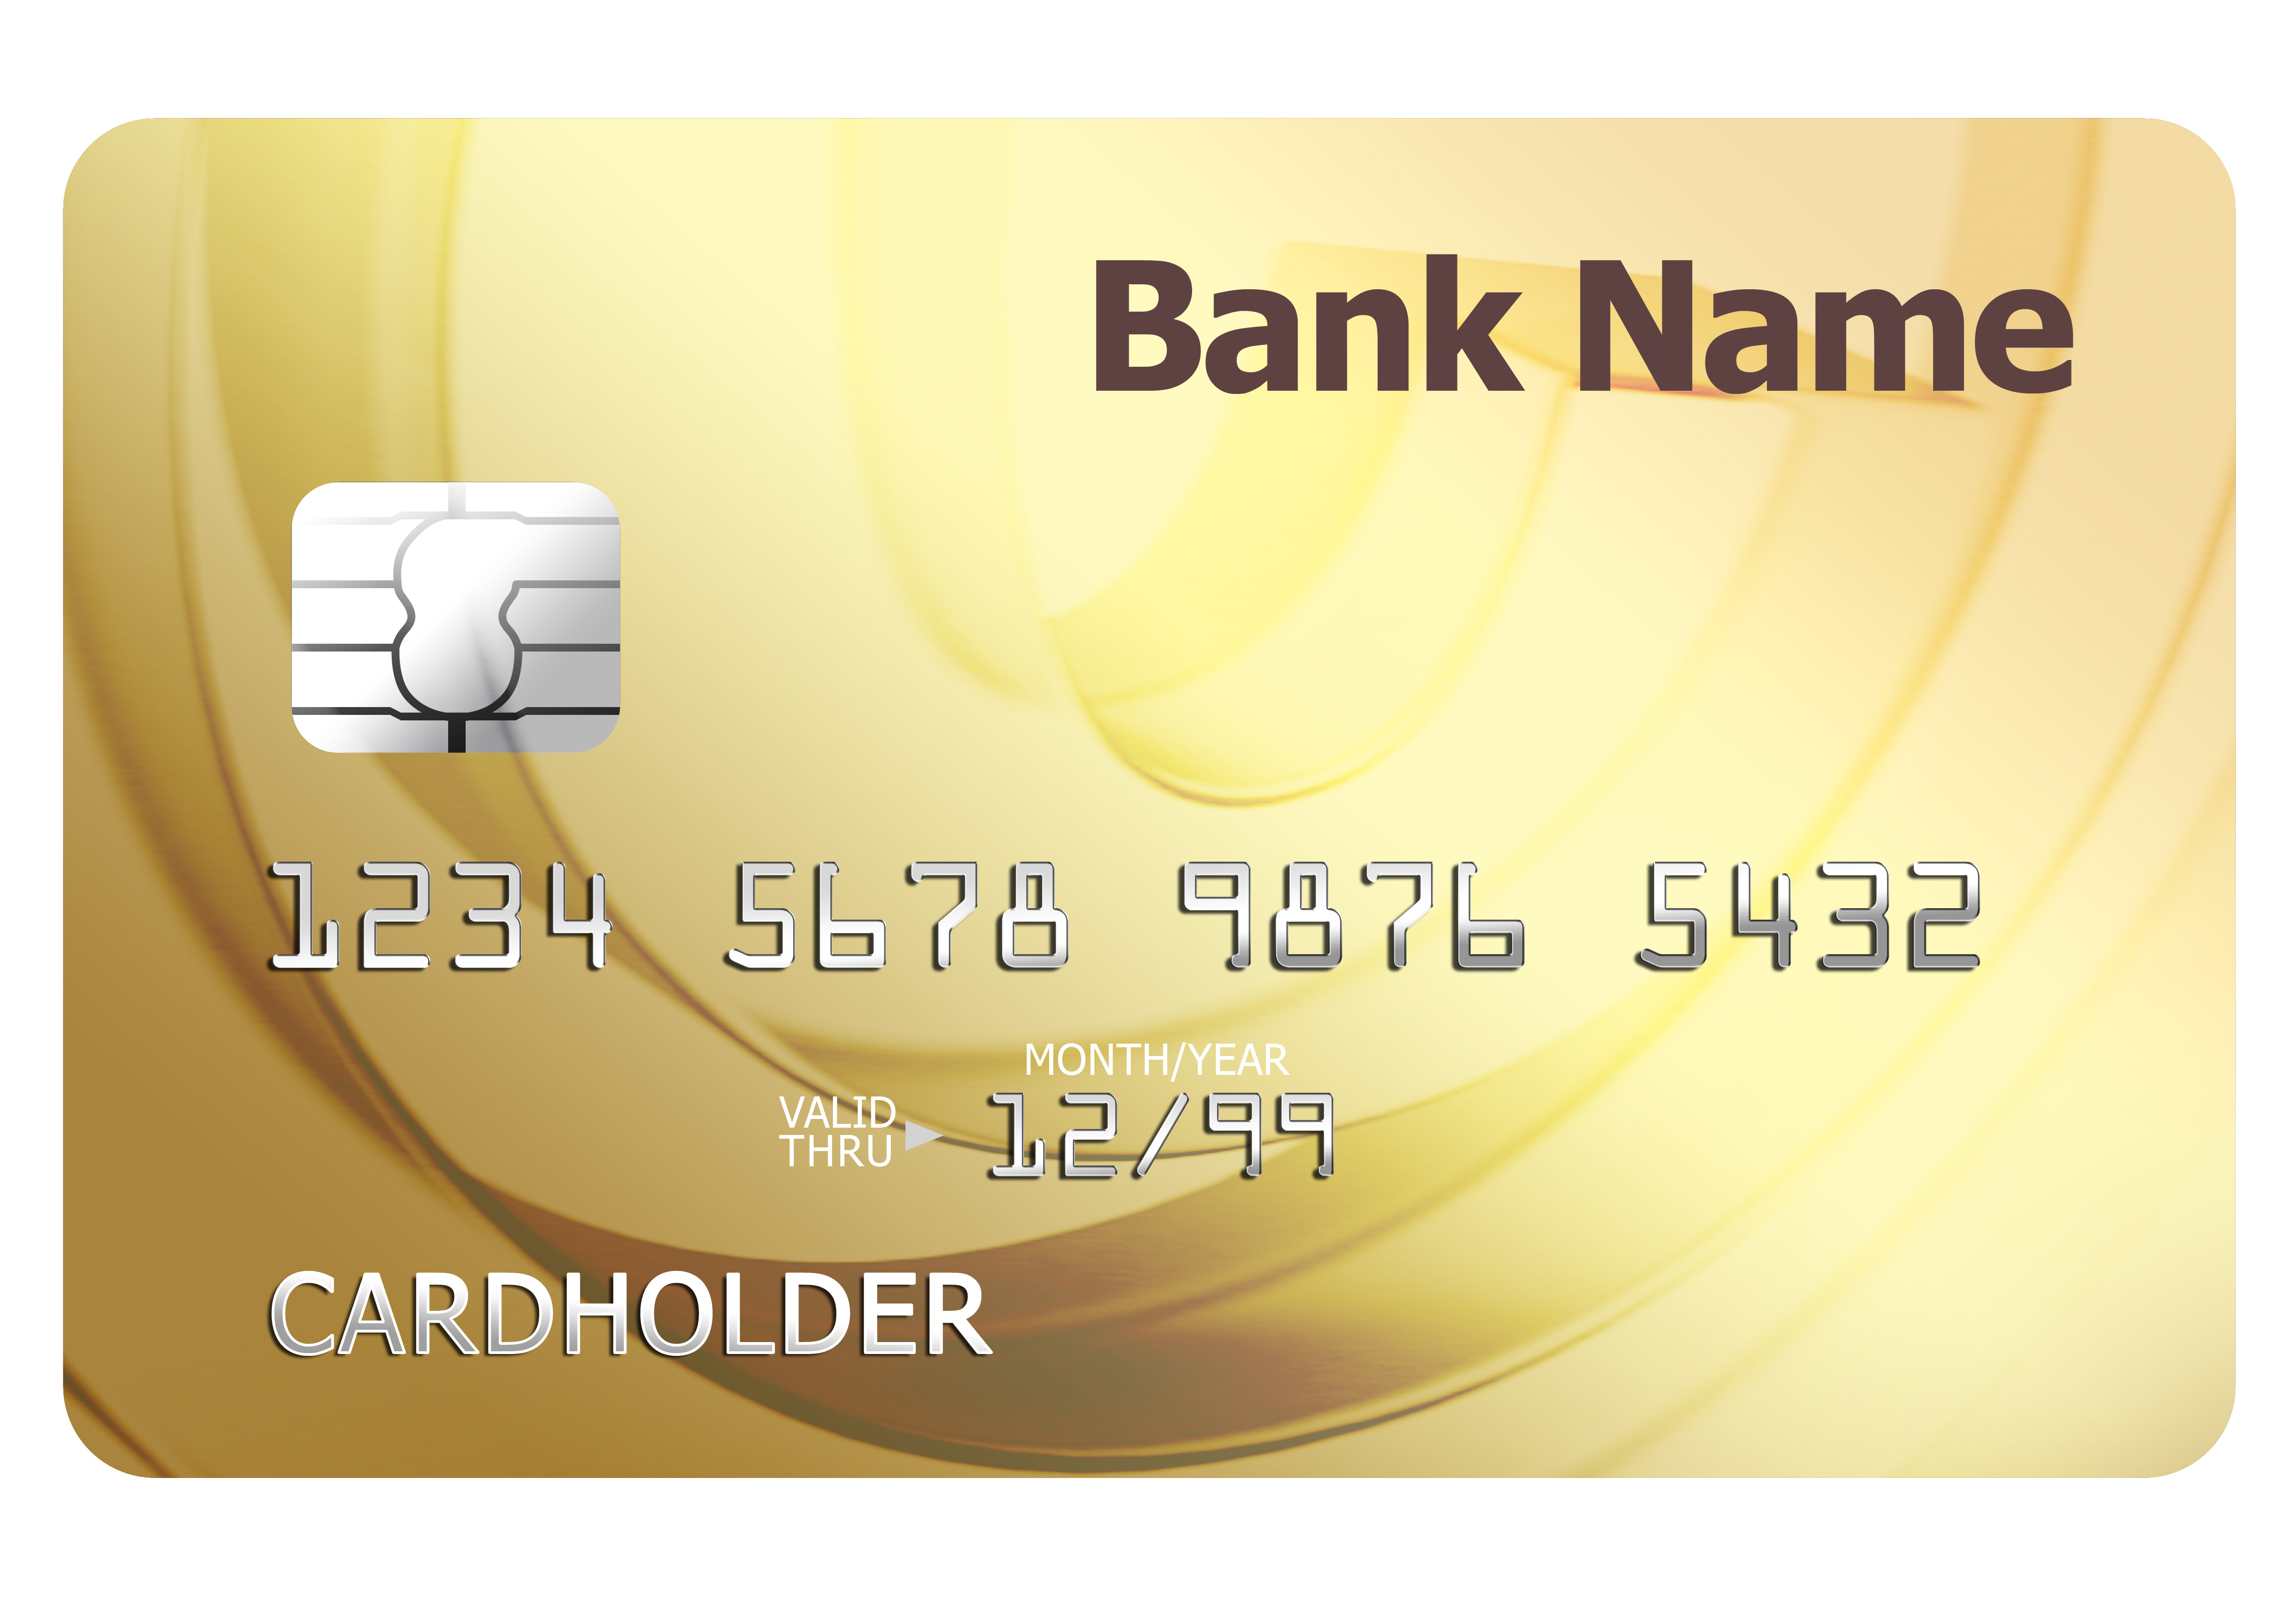 Blank Credit Card Template Free / Abstract Bank Credit Card Design